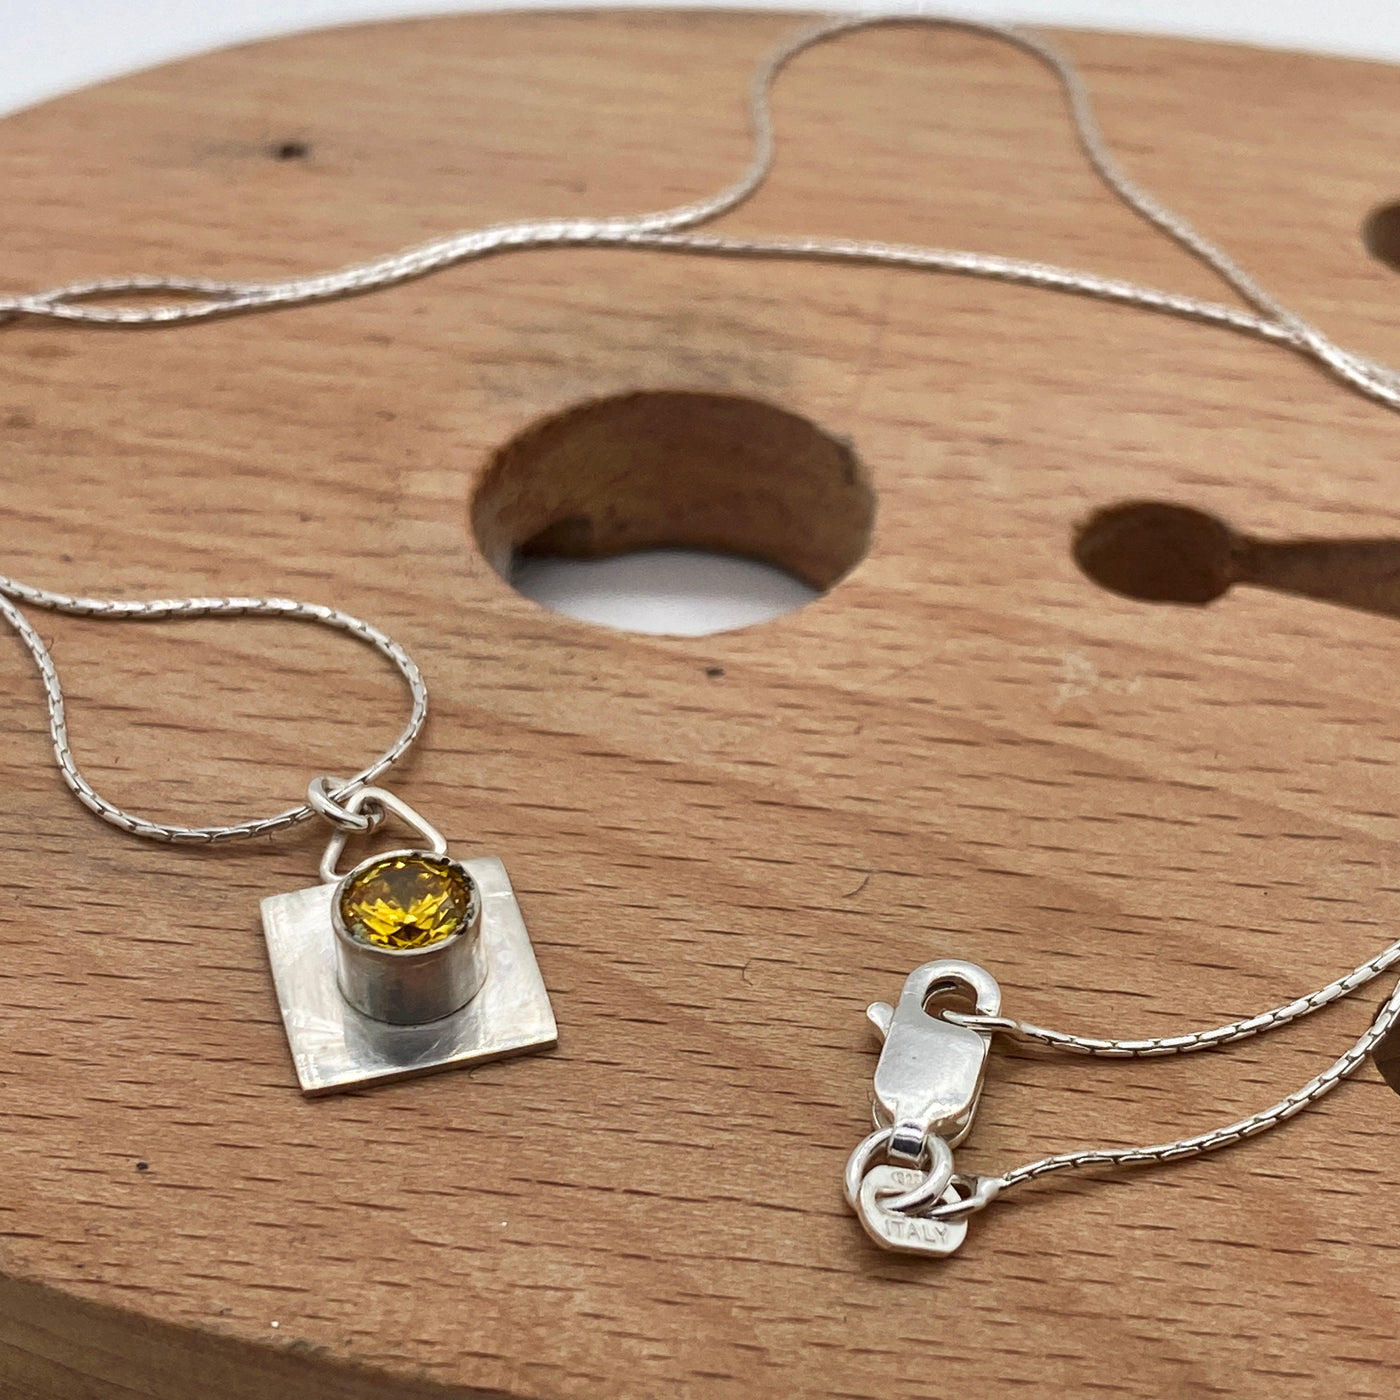 Square sterling silver frame for a tube with yellow cubic zirconia pendant on sterling silver chain